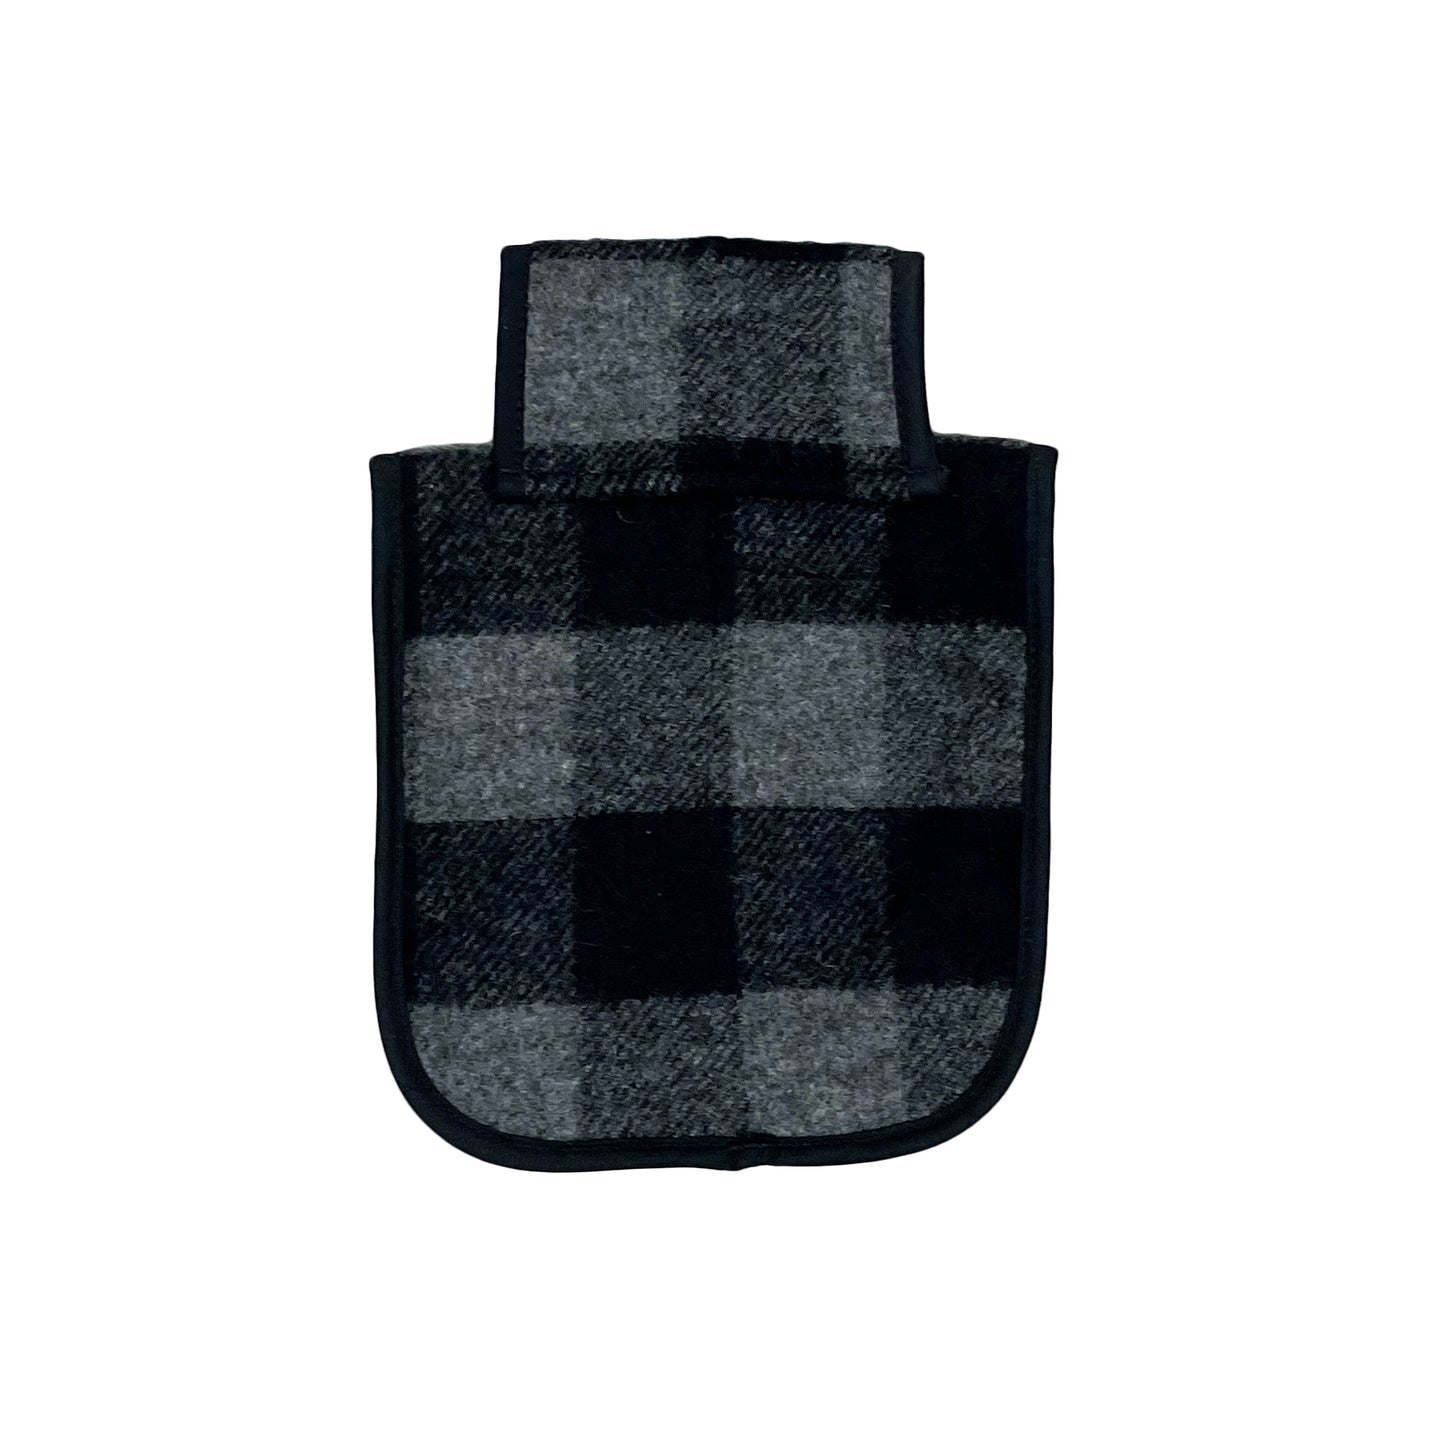 Black and gray hunting pouch back view